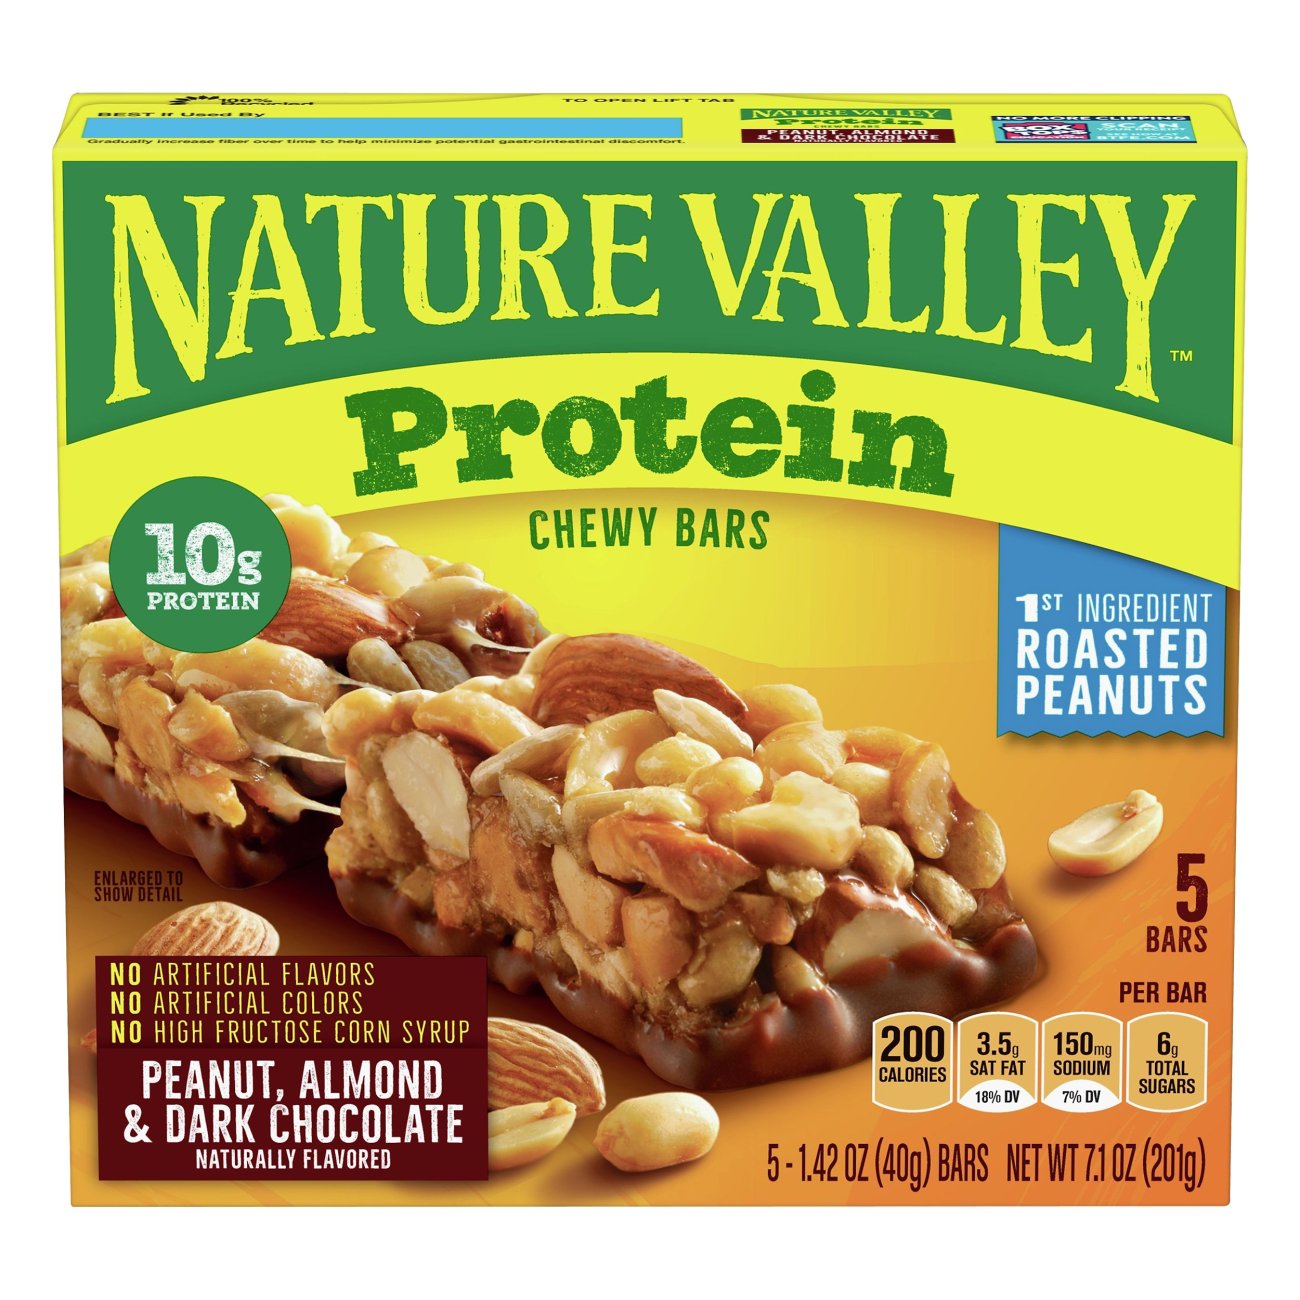 Nature Valley Protein Chewy Bars Peanut Almond And Dark Chocolate My